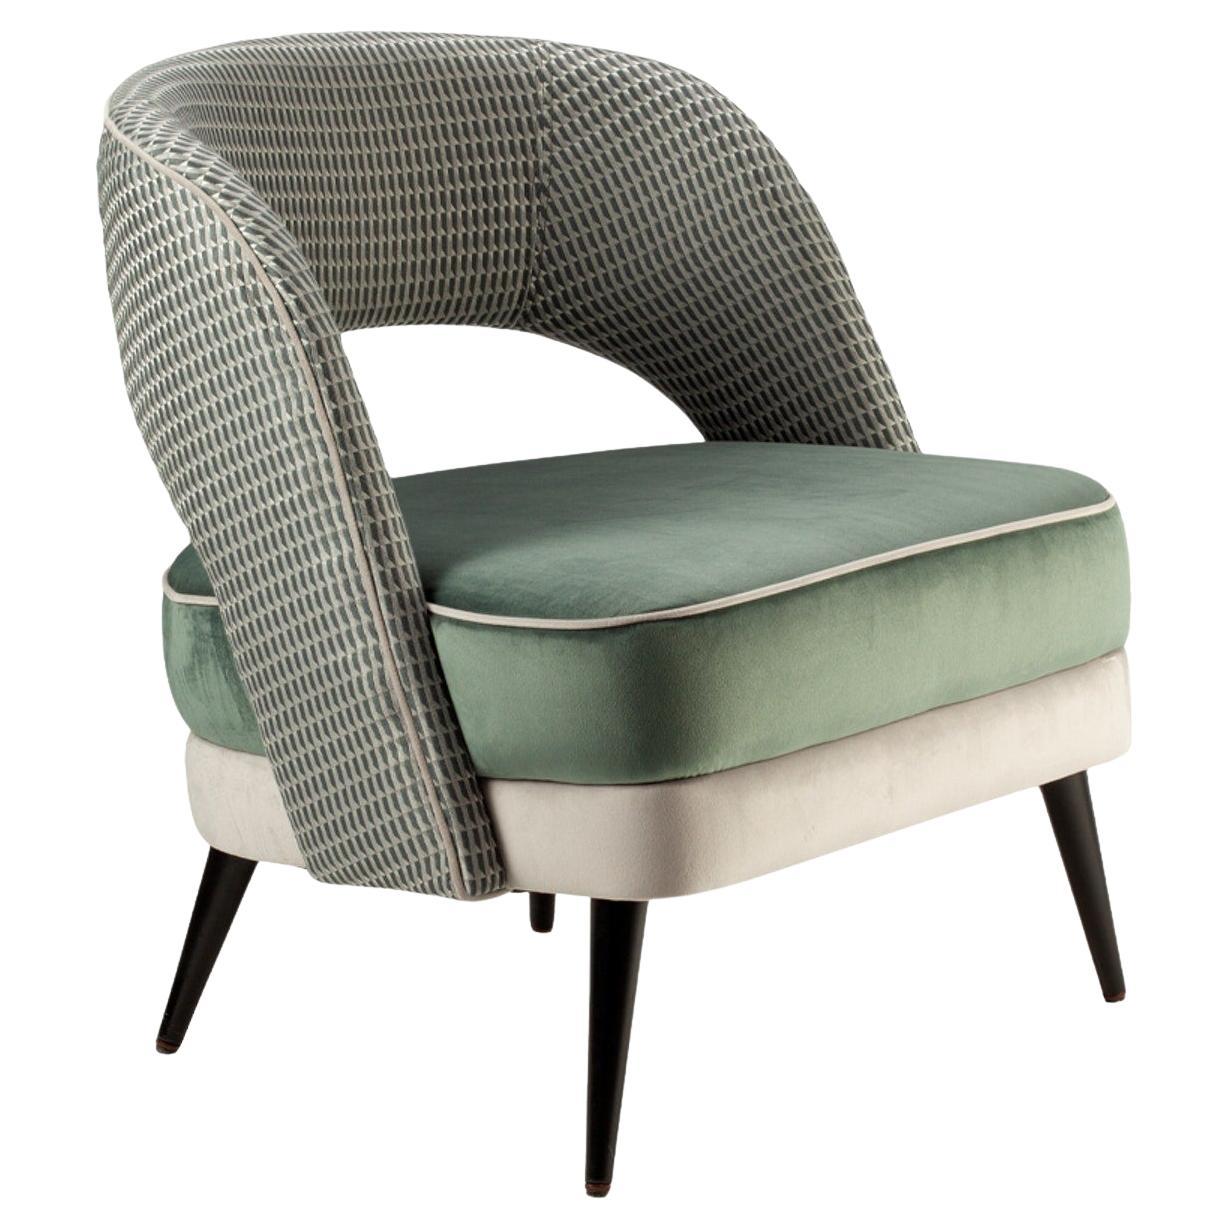 Ava Armchair Soft Green Seat and Patterned Olive Green Backrest For Sale